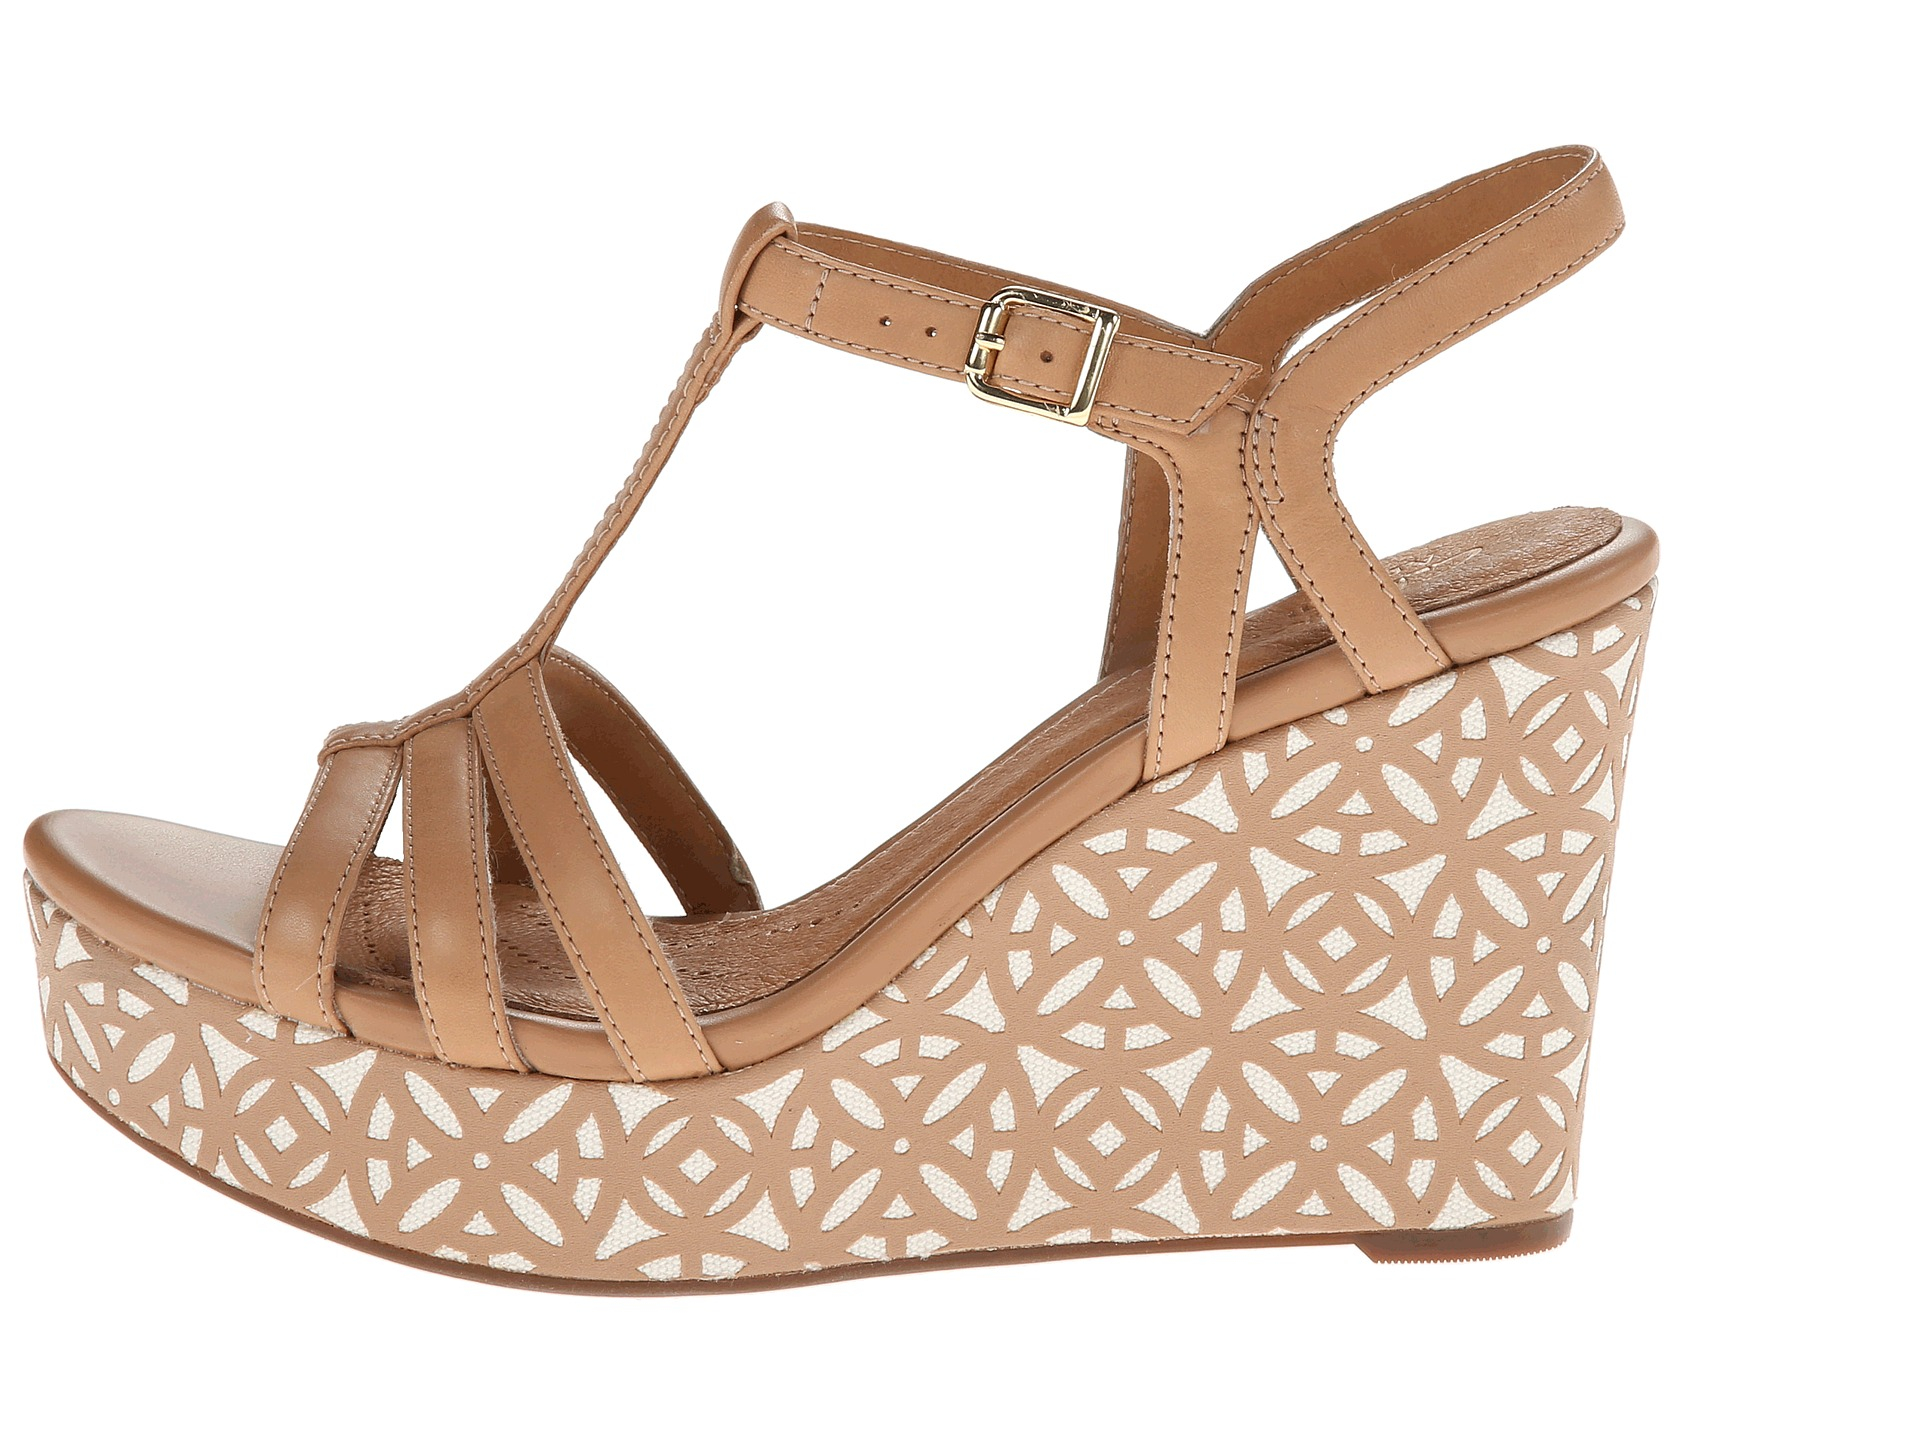 Clarks Amelia Avery in Beige (Natural) - Lyst